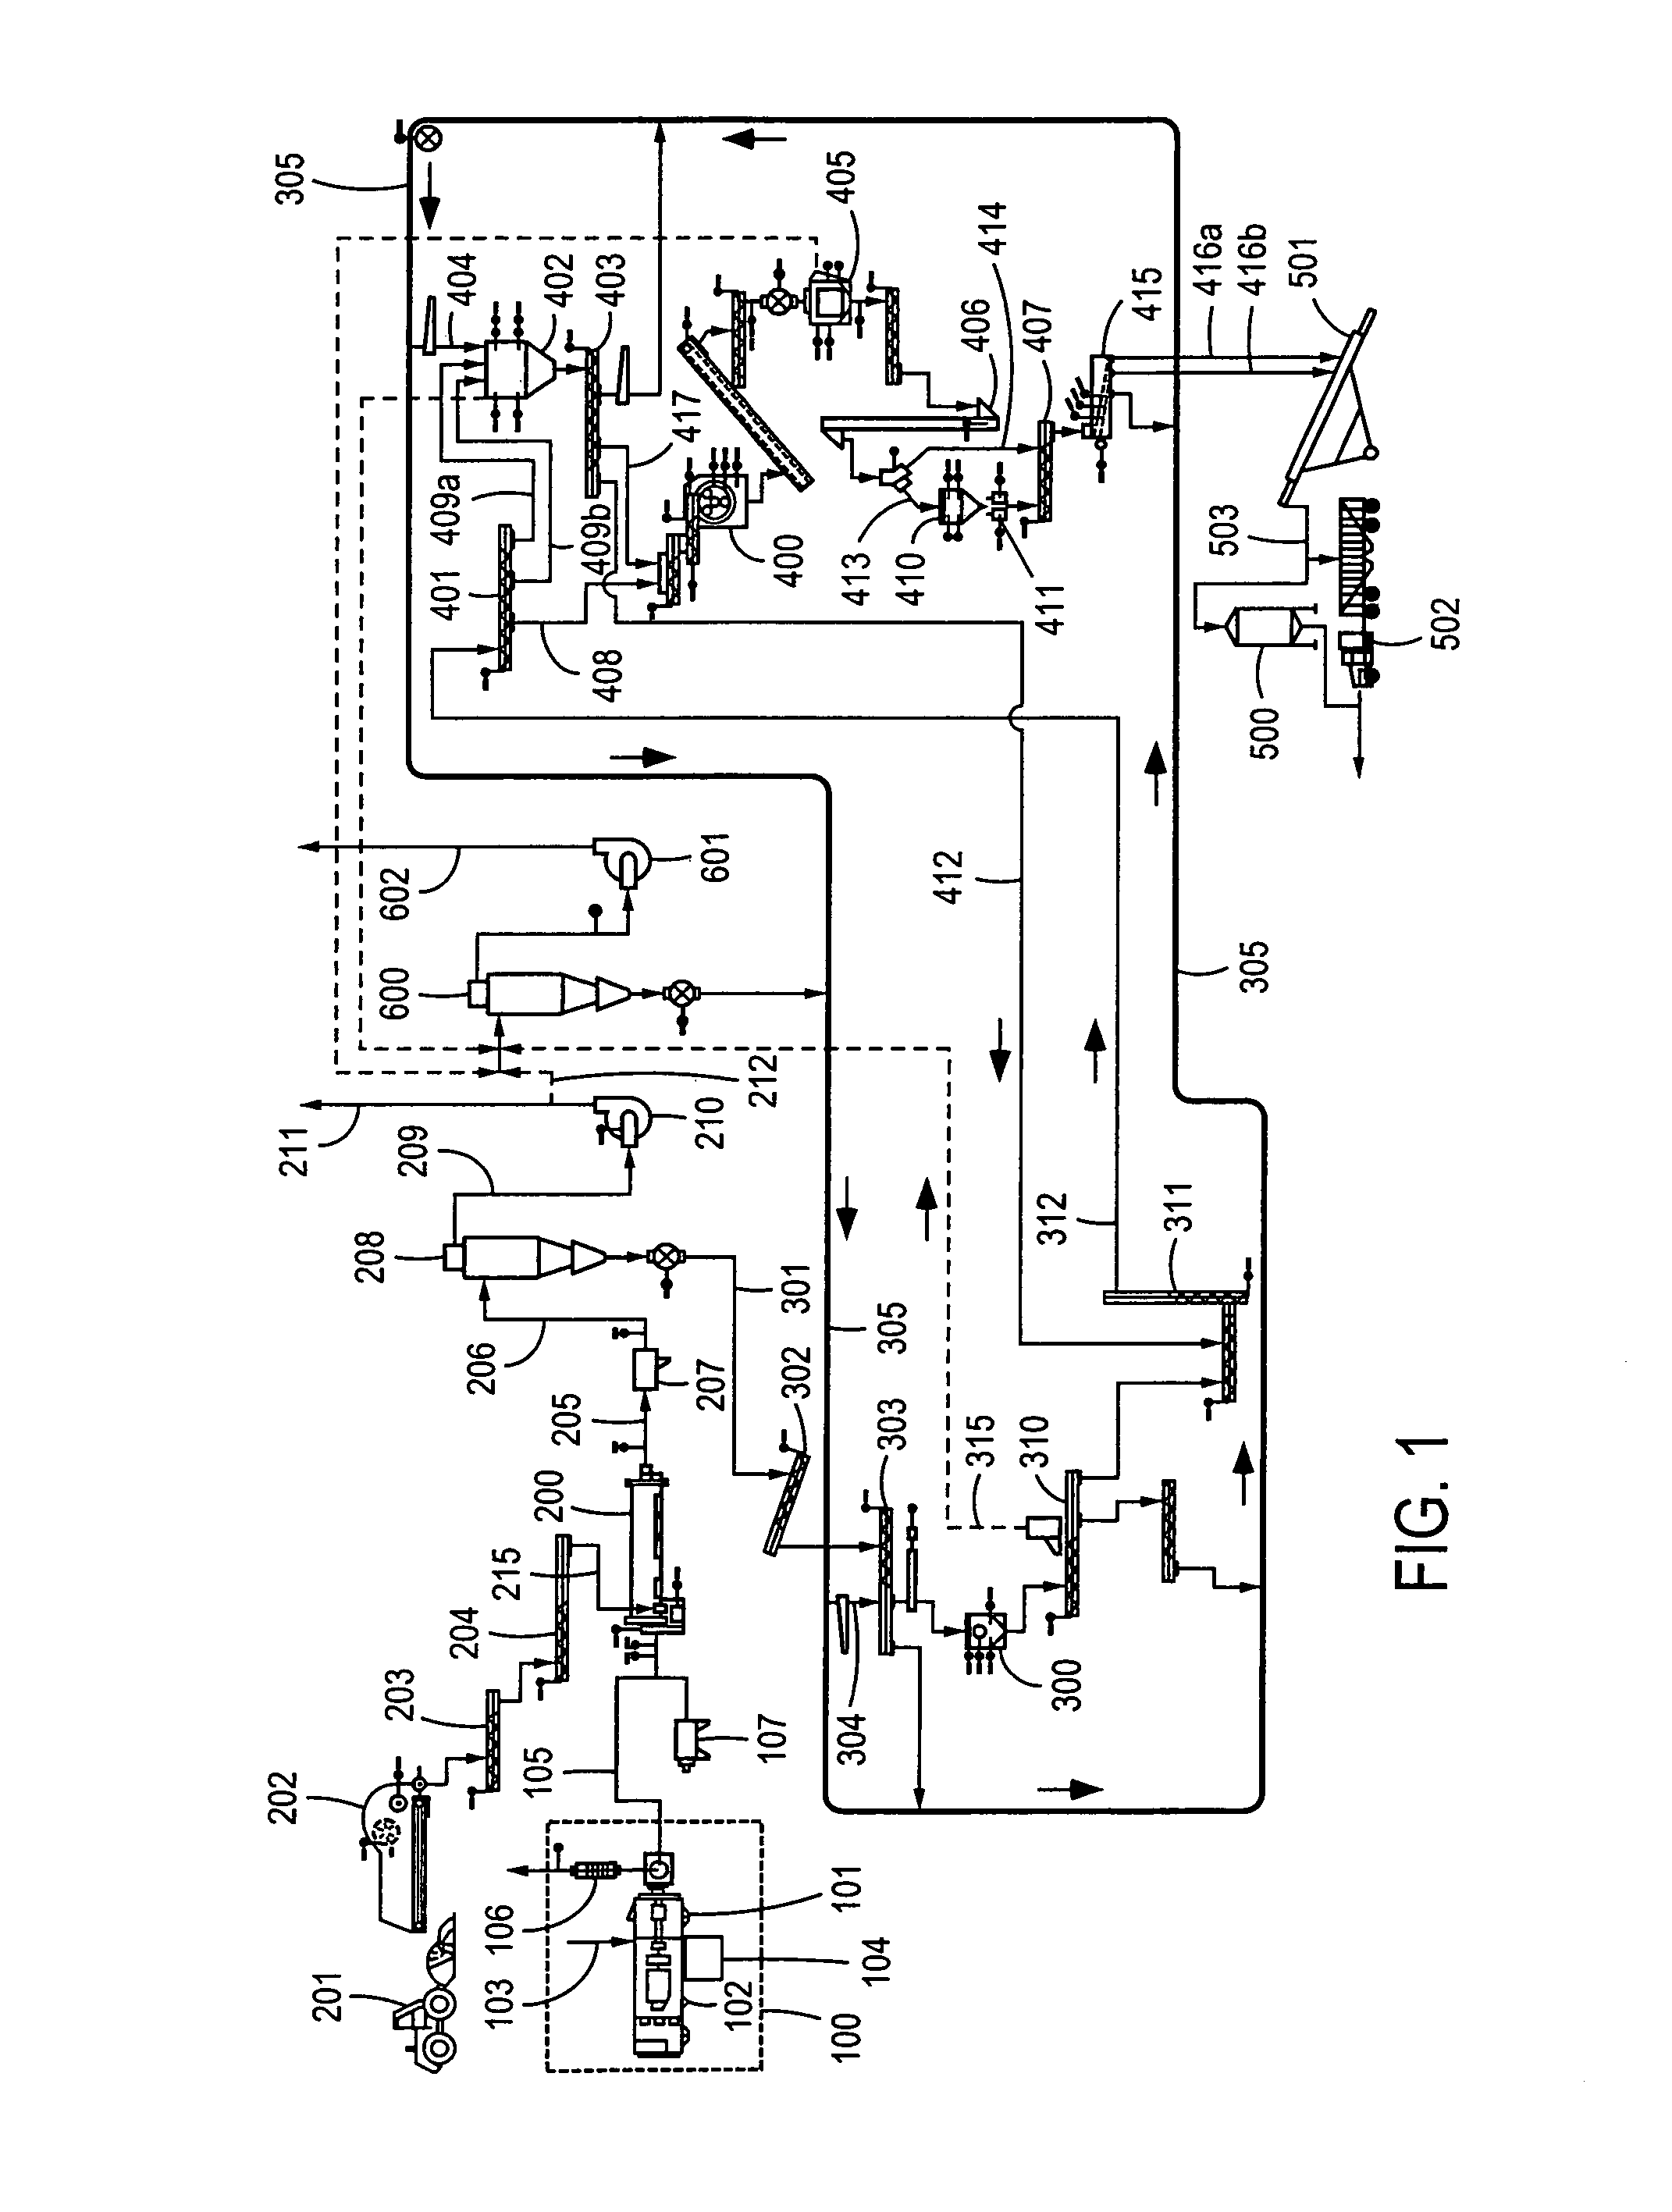 Process and system for drying and heat treating materials